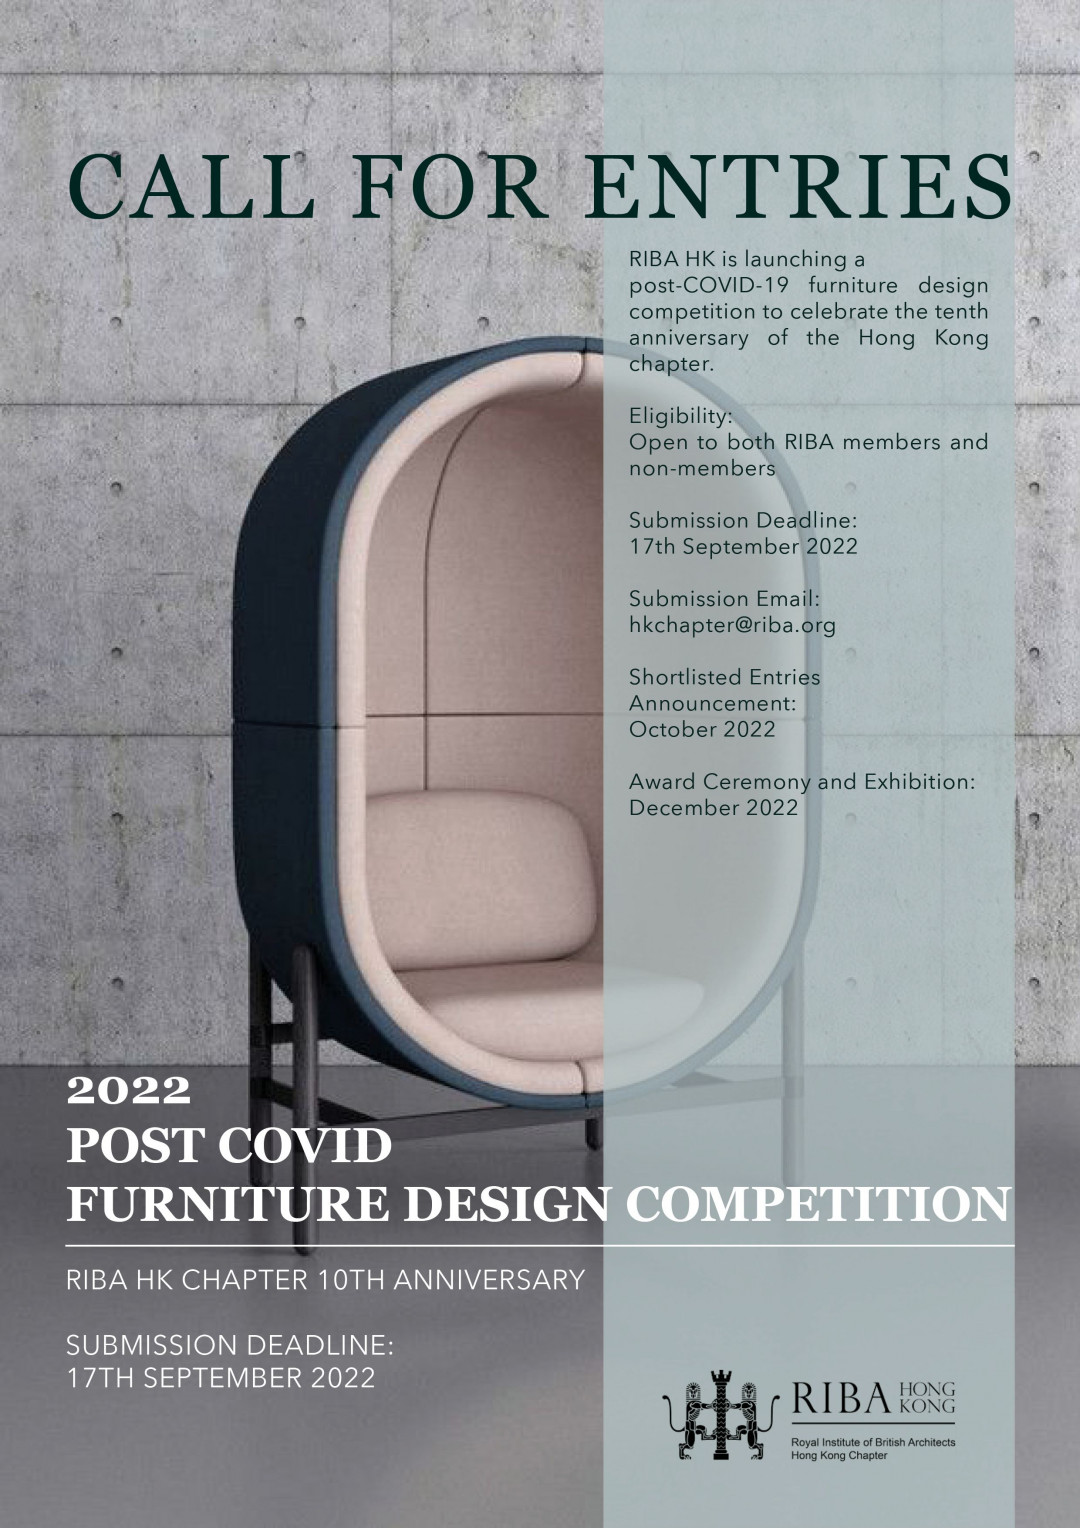 CALL FOR ENTRIES!  2022 POST COVID FURNITURE DESIGN COMPETITION SUBMISSION DEADLINE 17TH SEPTEMBER 2022